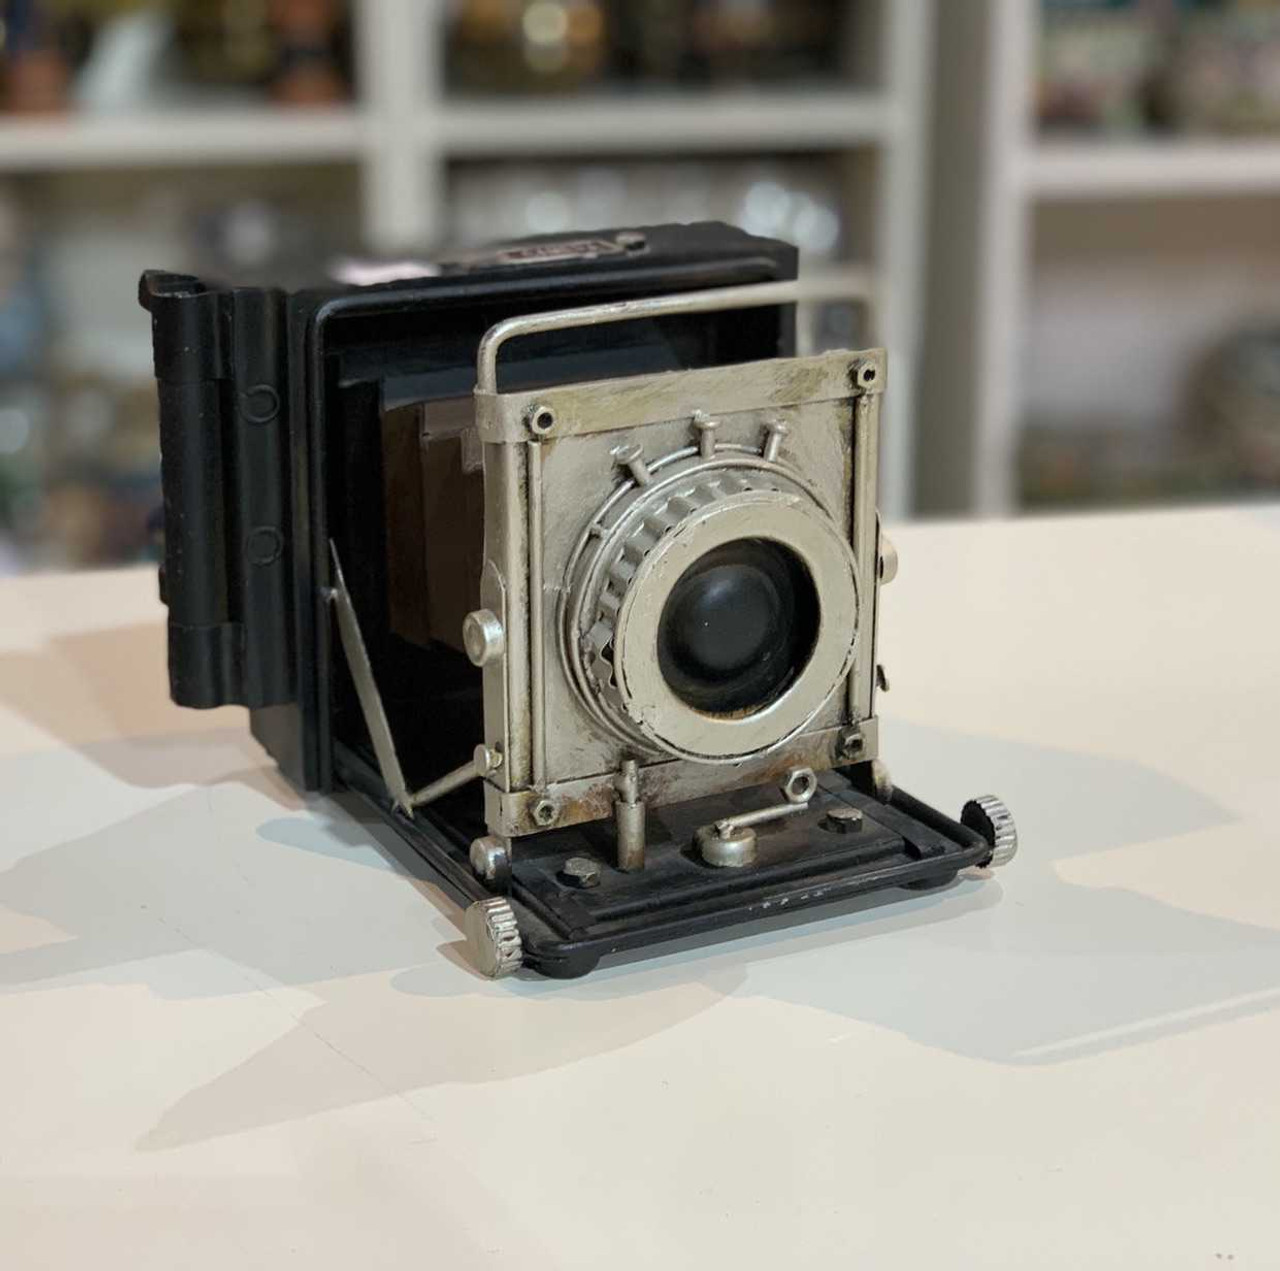 The Art of Analog: Why Vintage Cameras Are Making a Comeback插图3